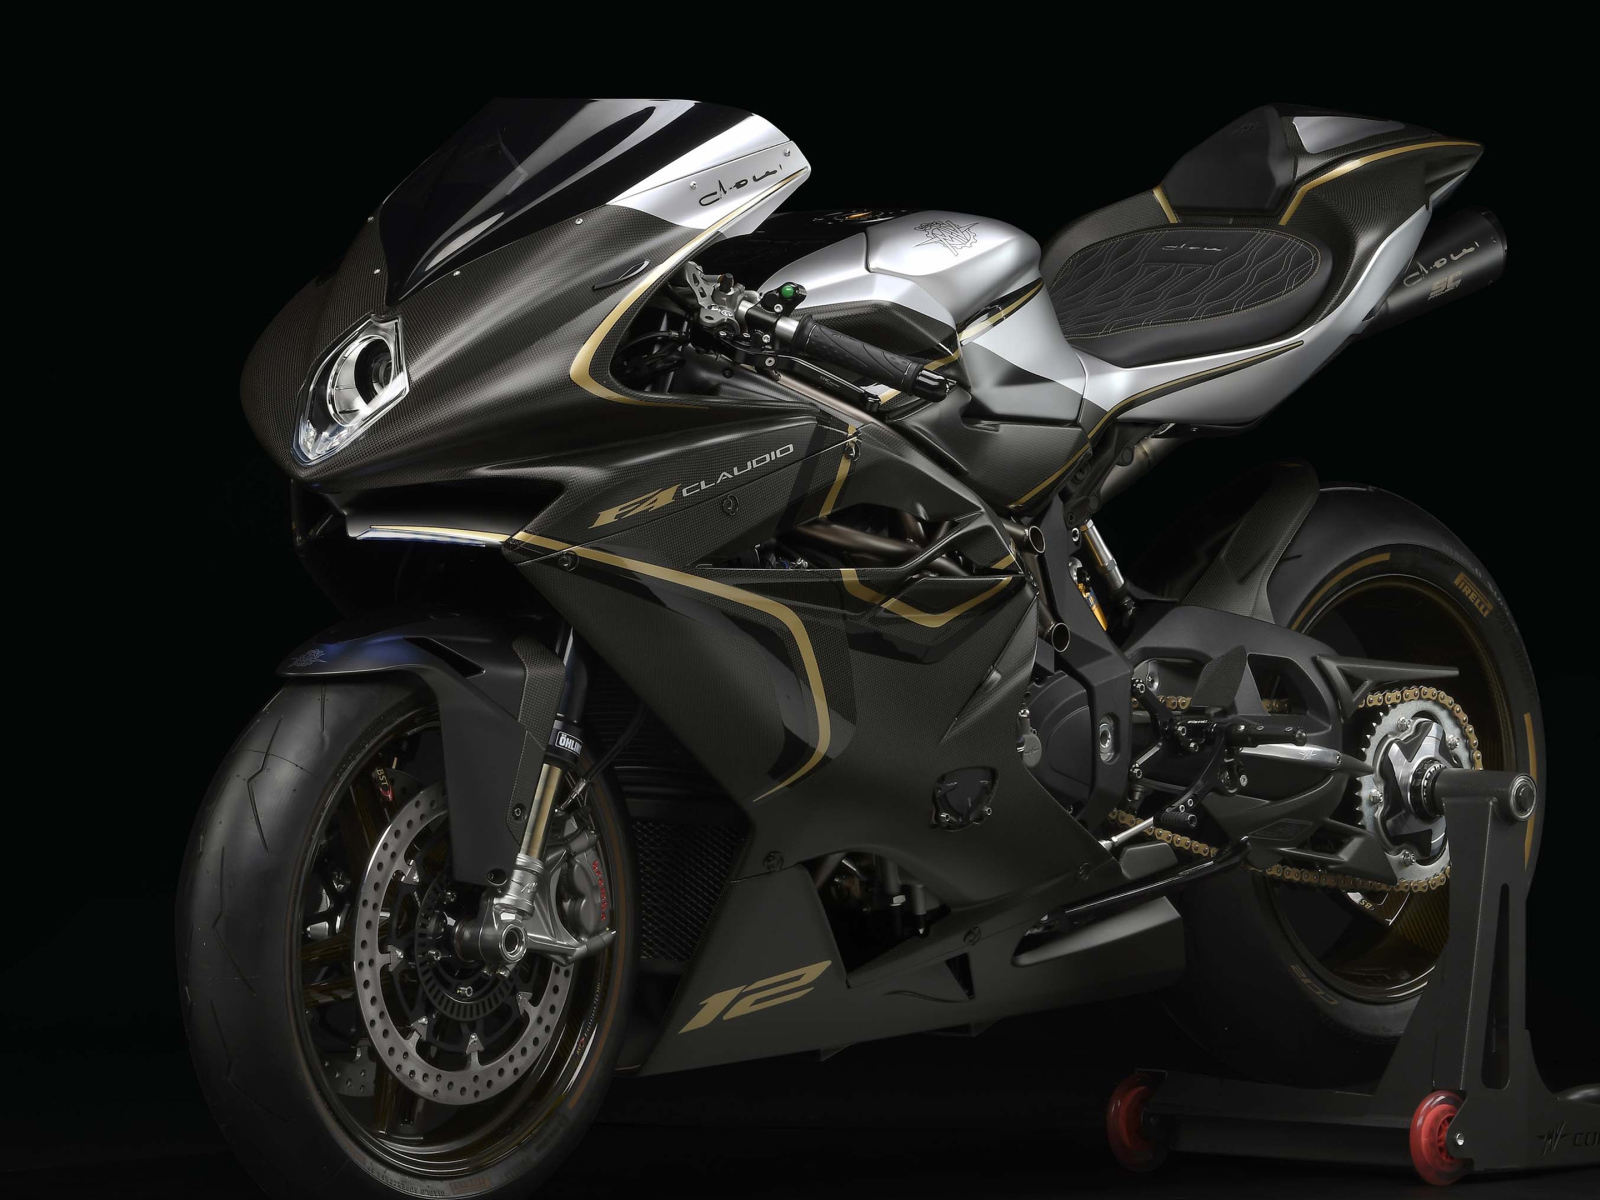 Motorcycle Agusta F4 Claudio 2018 on a black background